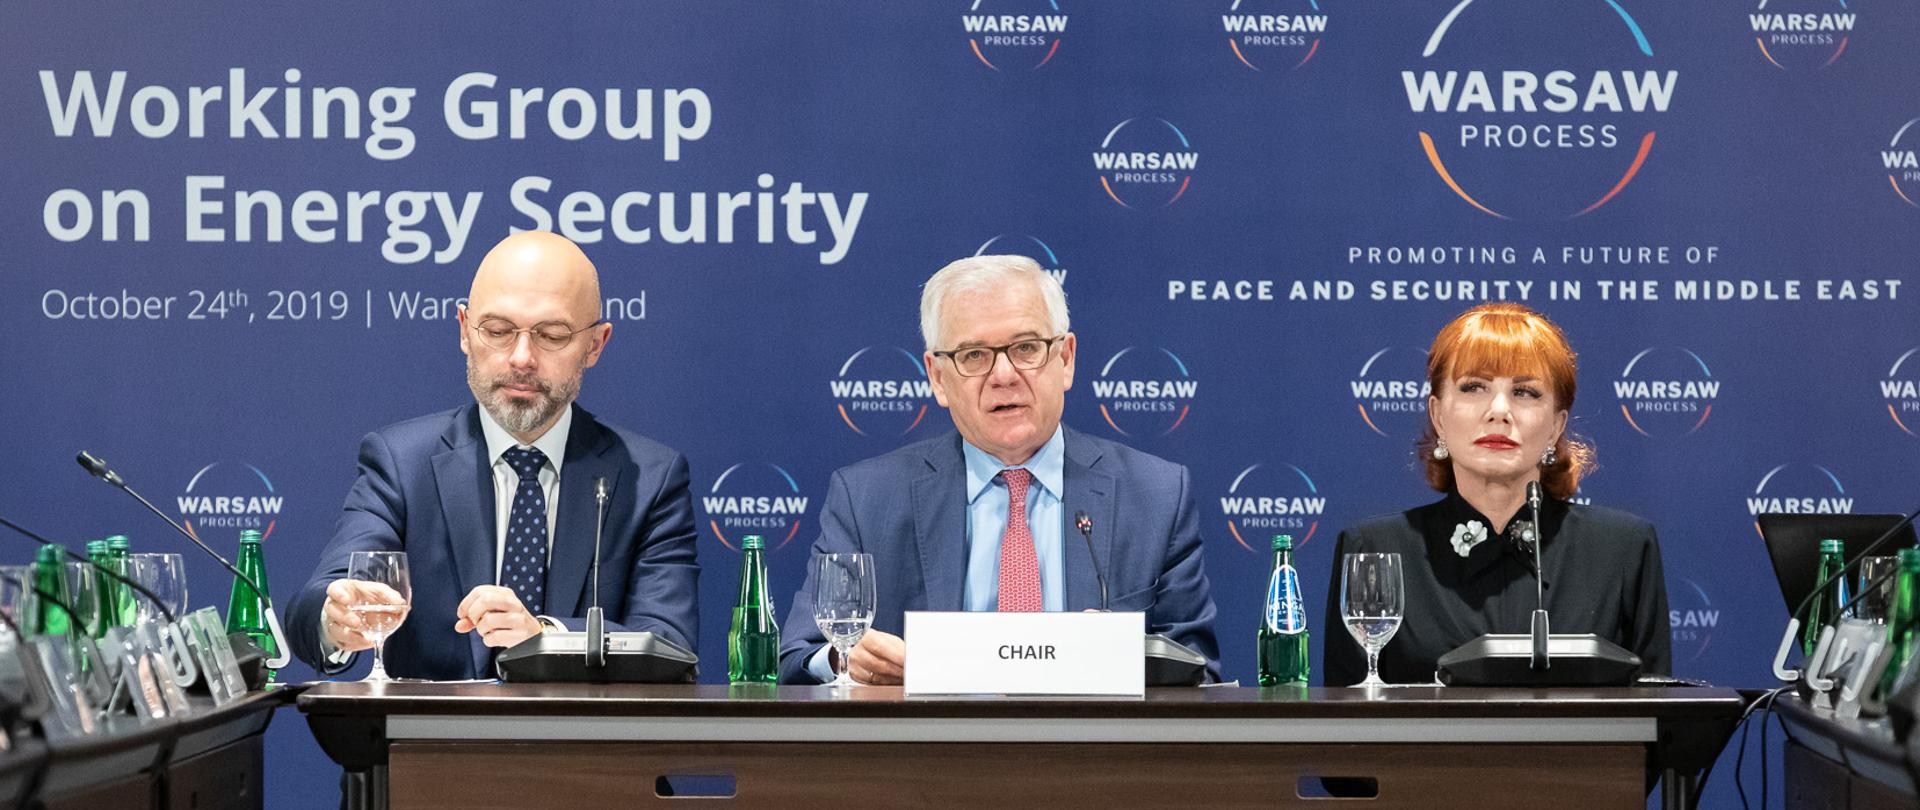 Minister Jacek Czaputowicz opens a session of the Working Group on Energy Security within the Warsaw Process